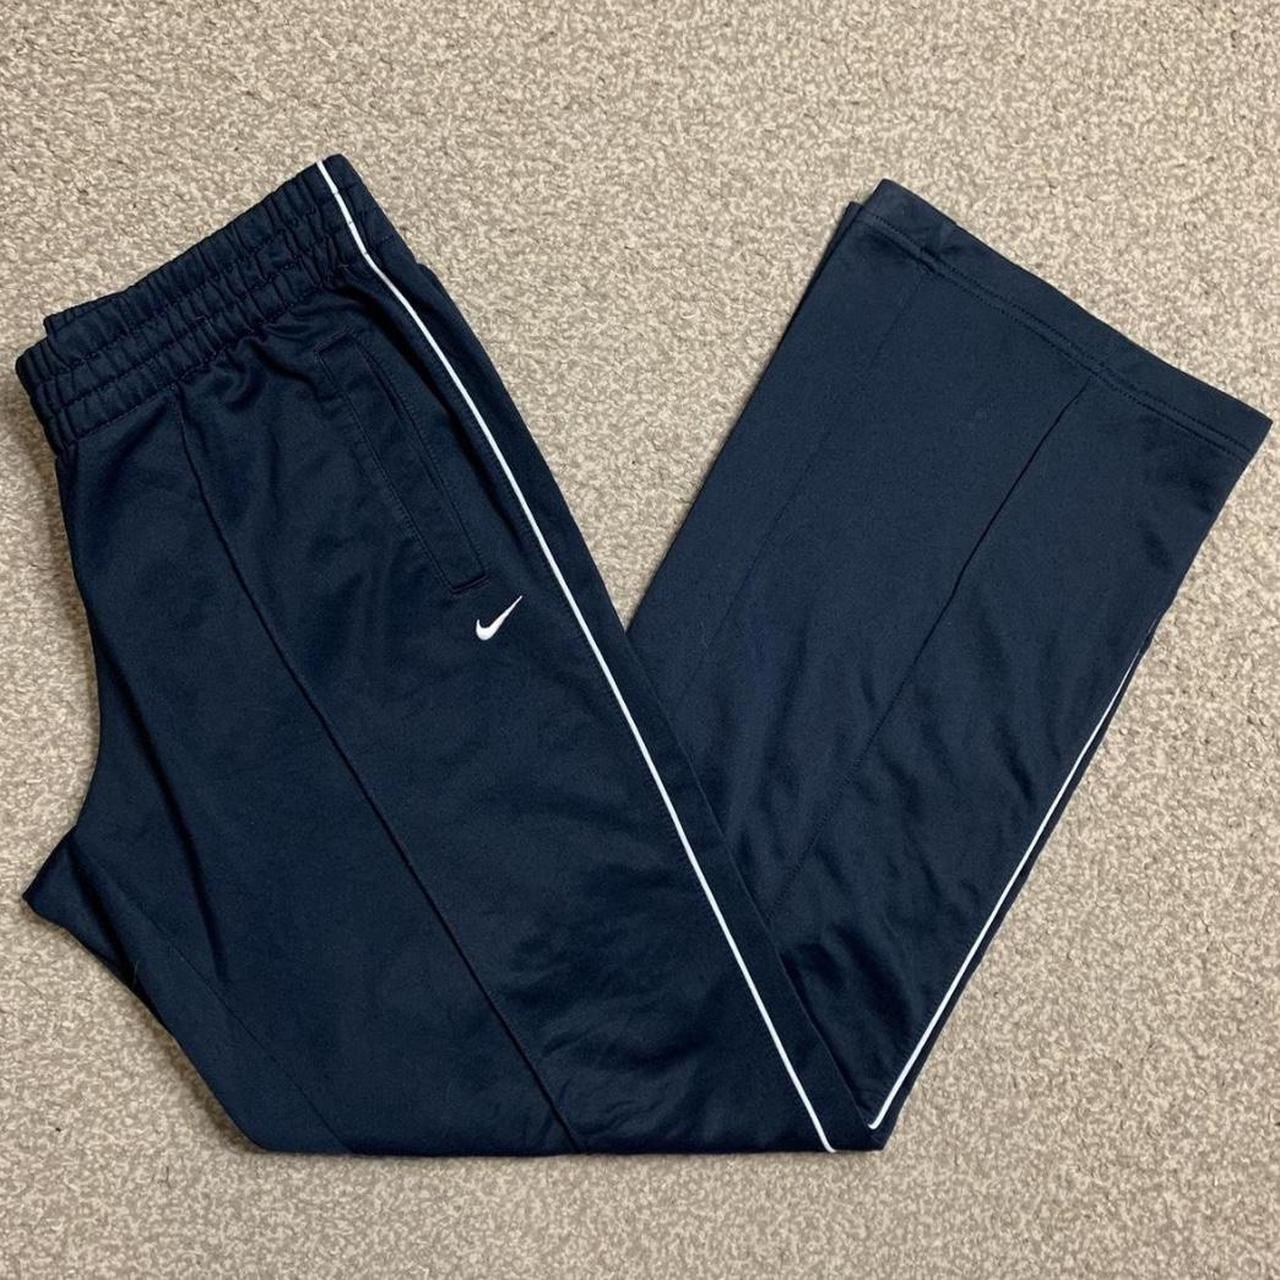 Nike Men's Navy and White Joggers-tracksuits | Depop